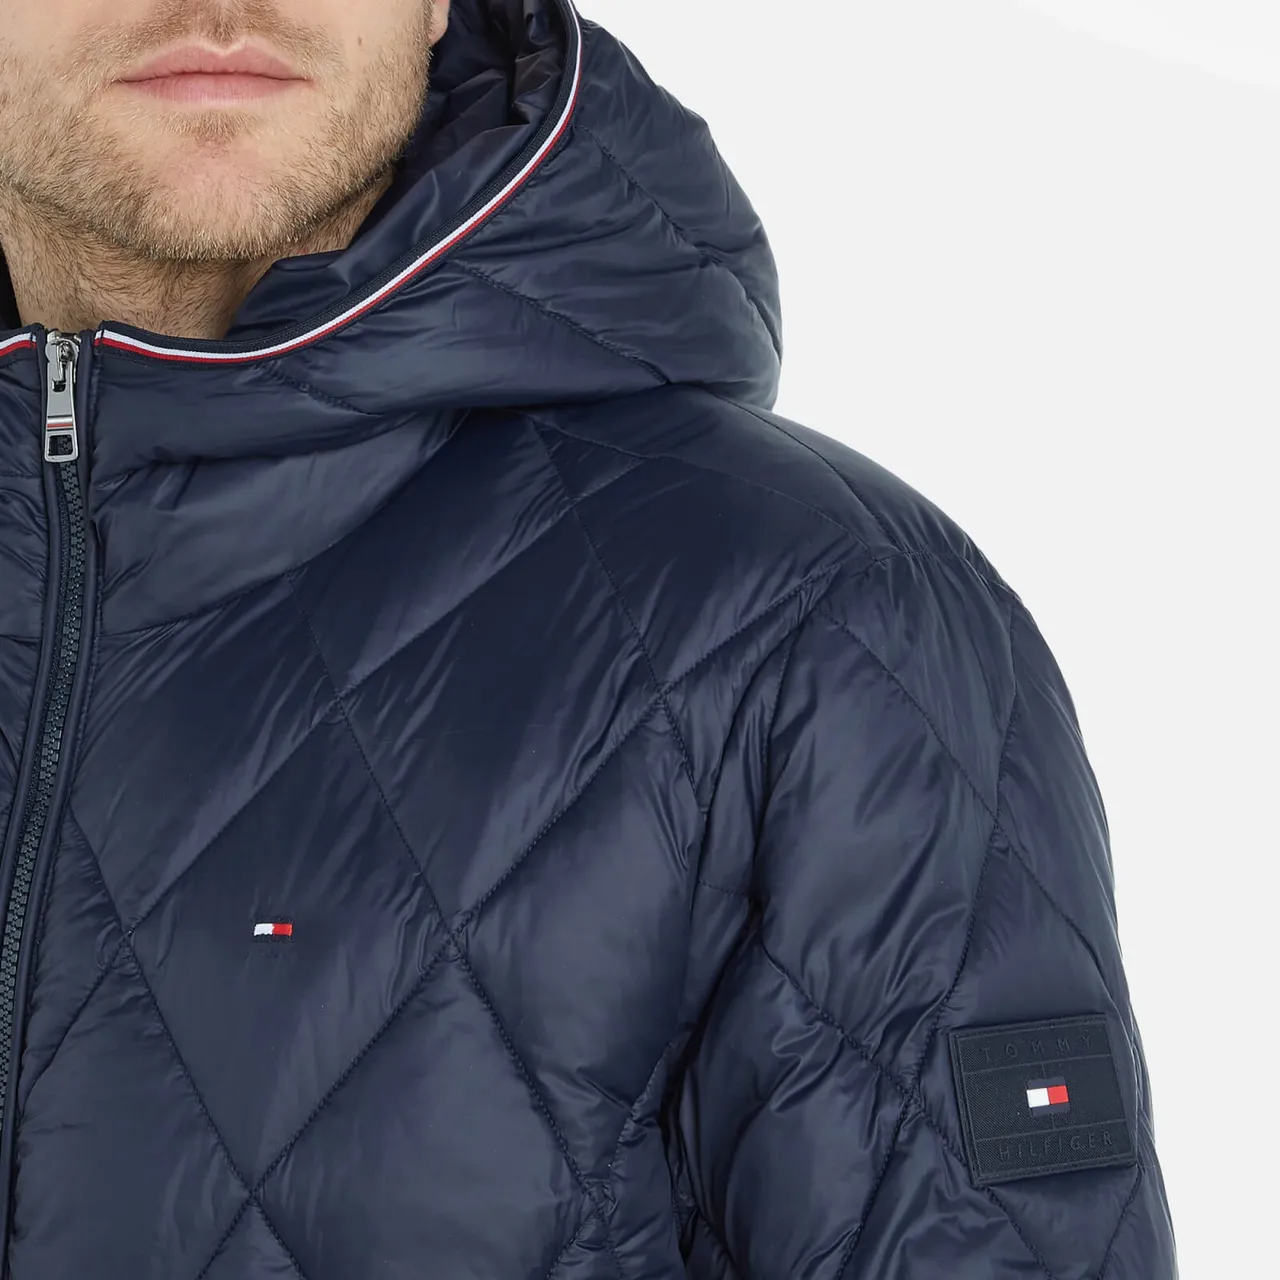 Tommy Hilfiger Mix Quilt Recycled Nylon Hooded Jacket